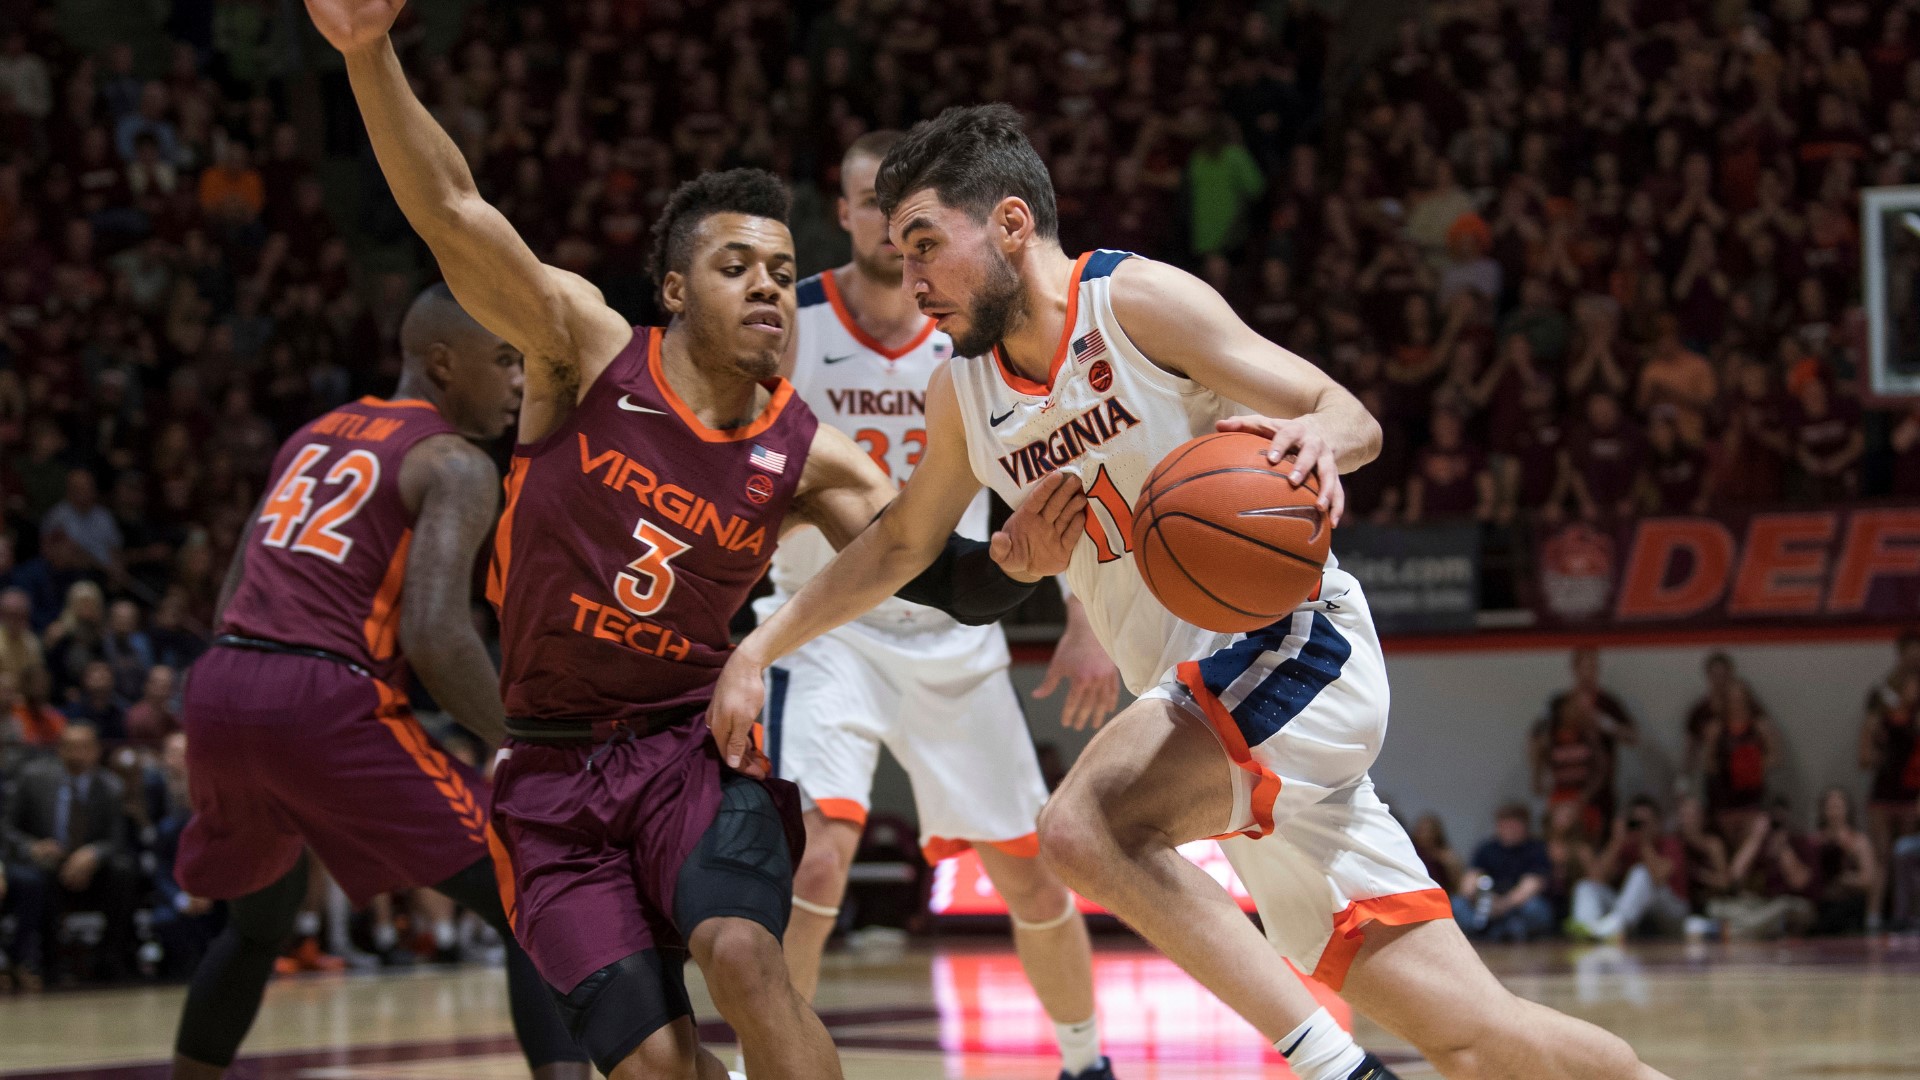 The simple difference in the game, the Cavaliers hit their threes and the Hokies certainly did not. End result, UVA wins it 62-56.